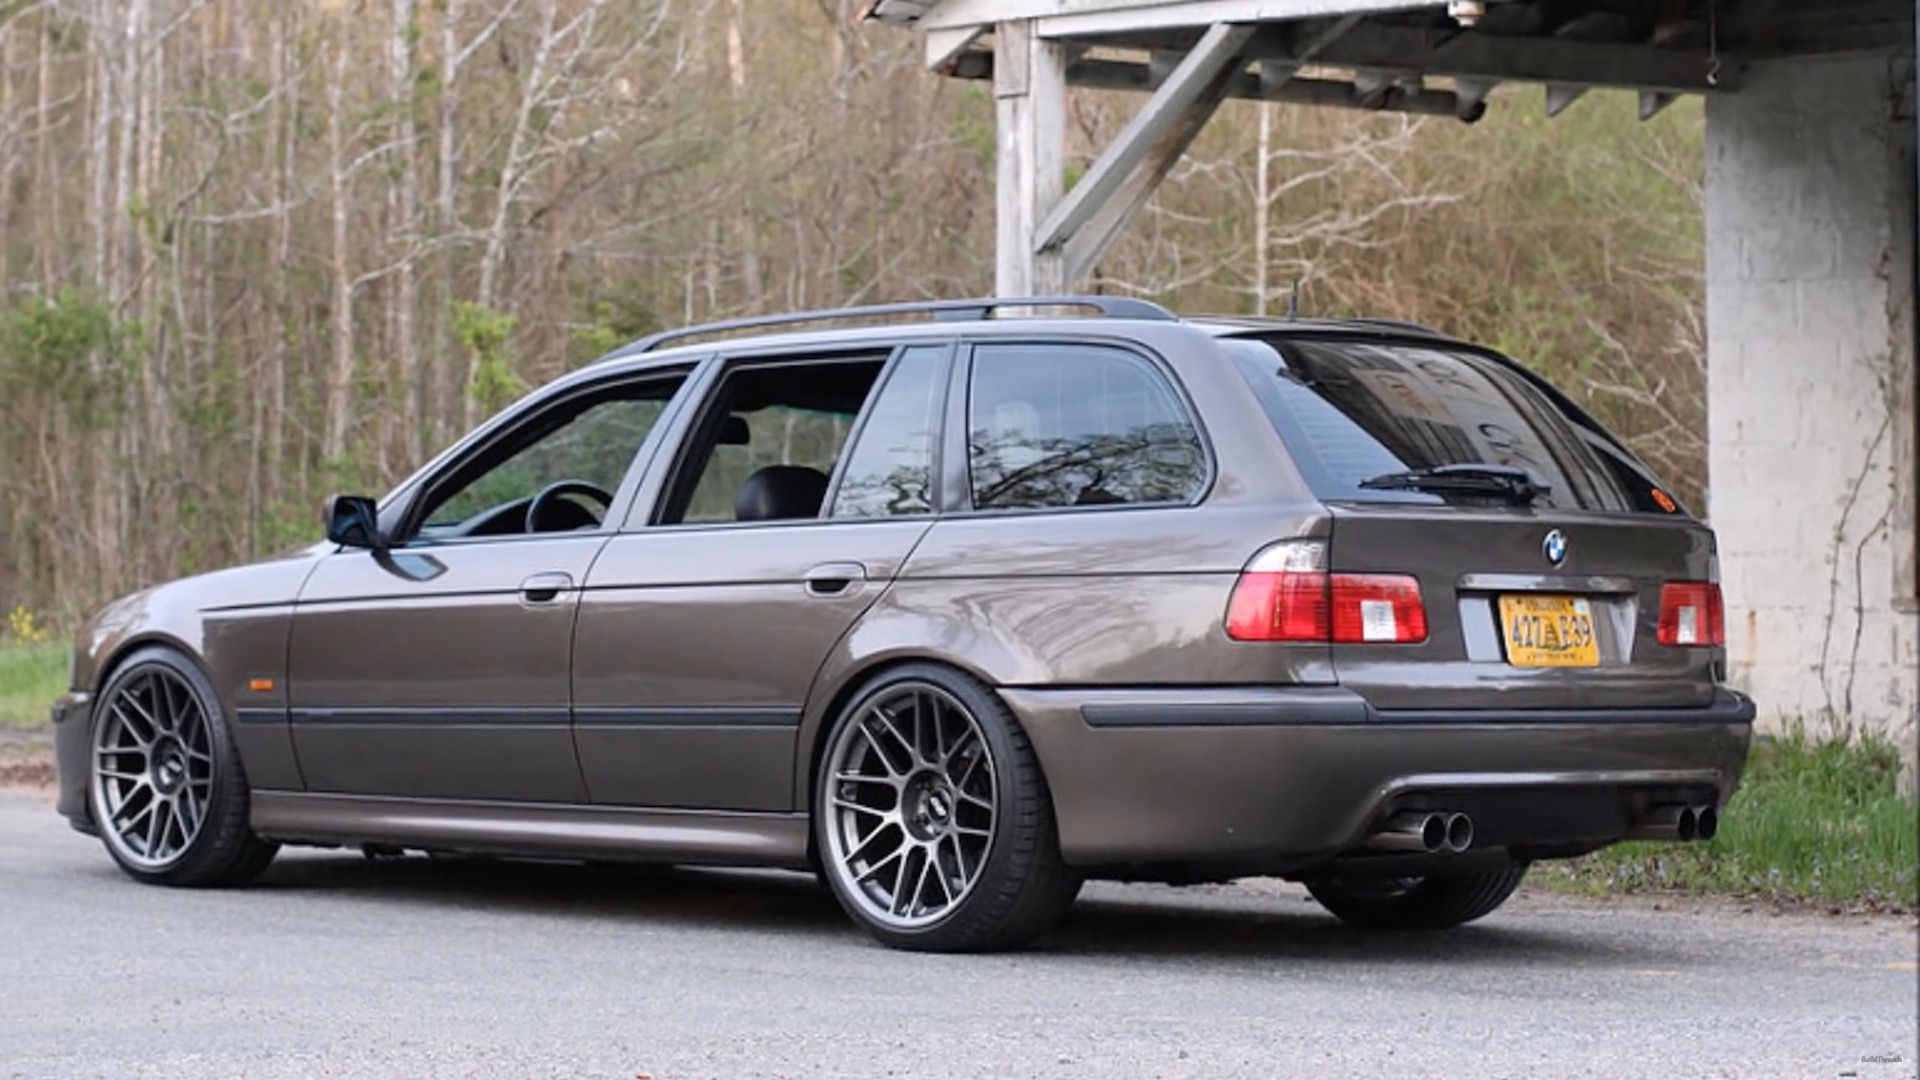 A Restomod Video Showing A BMW E39 Touring With A New LS7 Engine